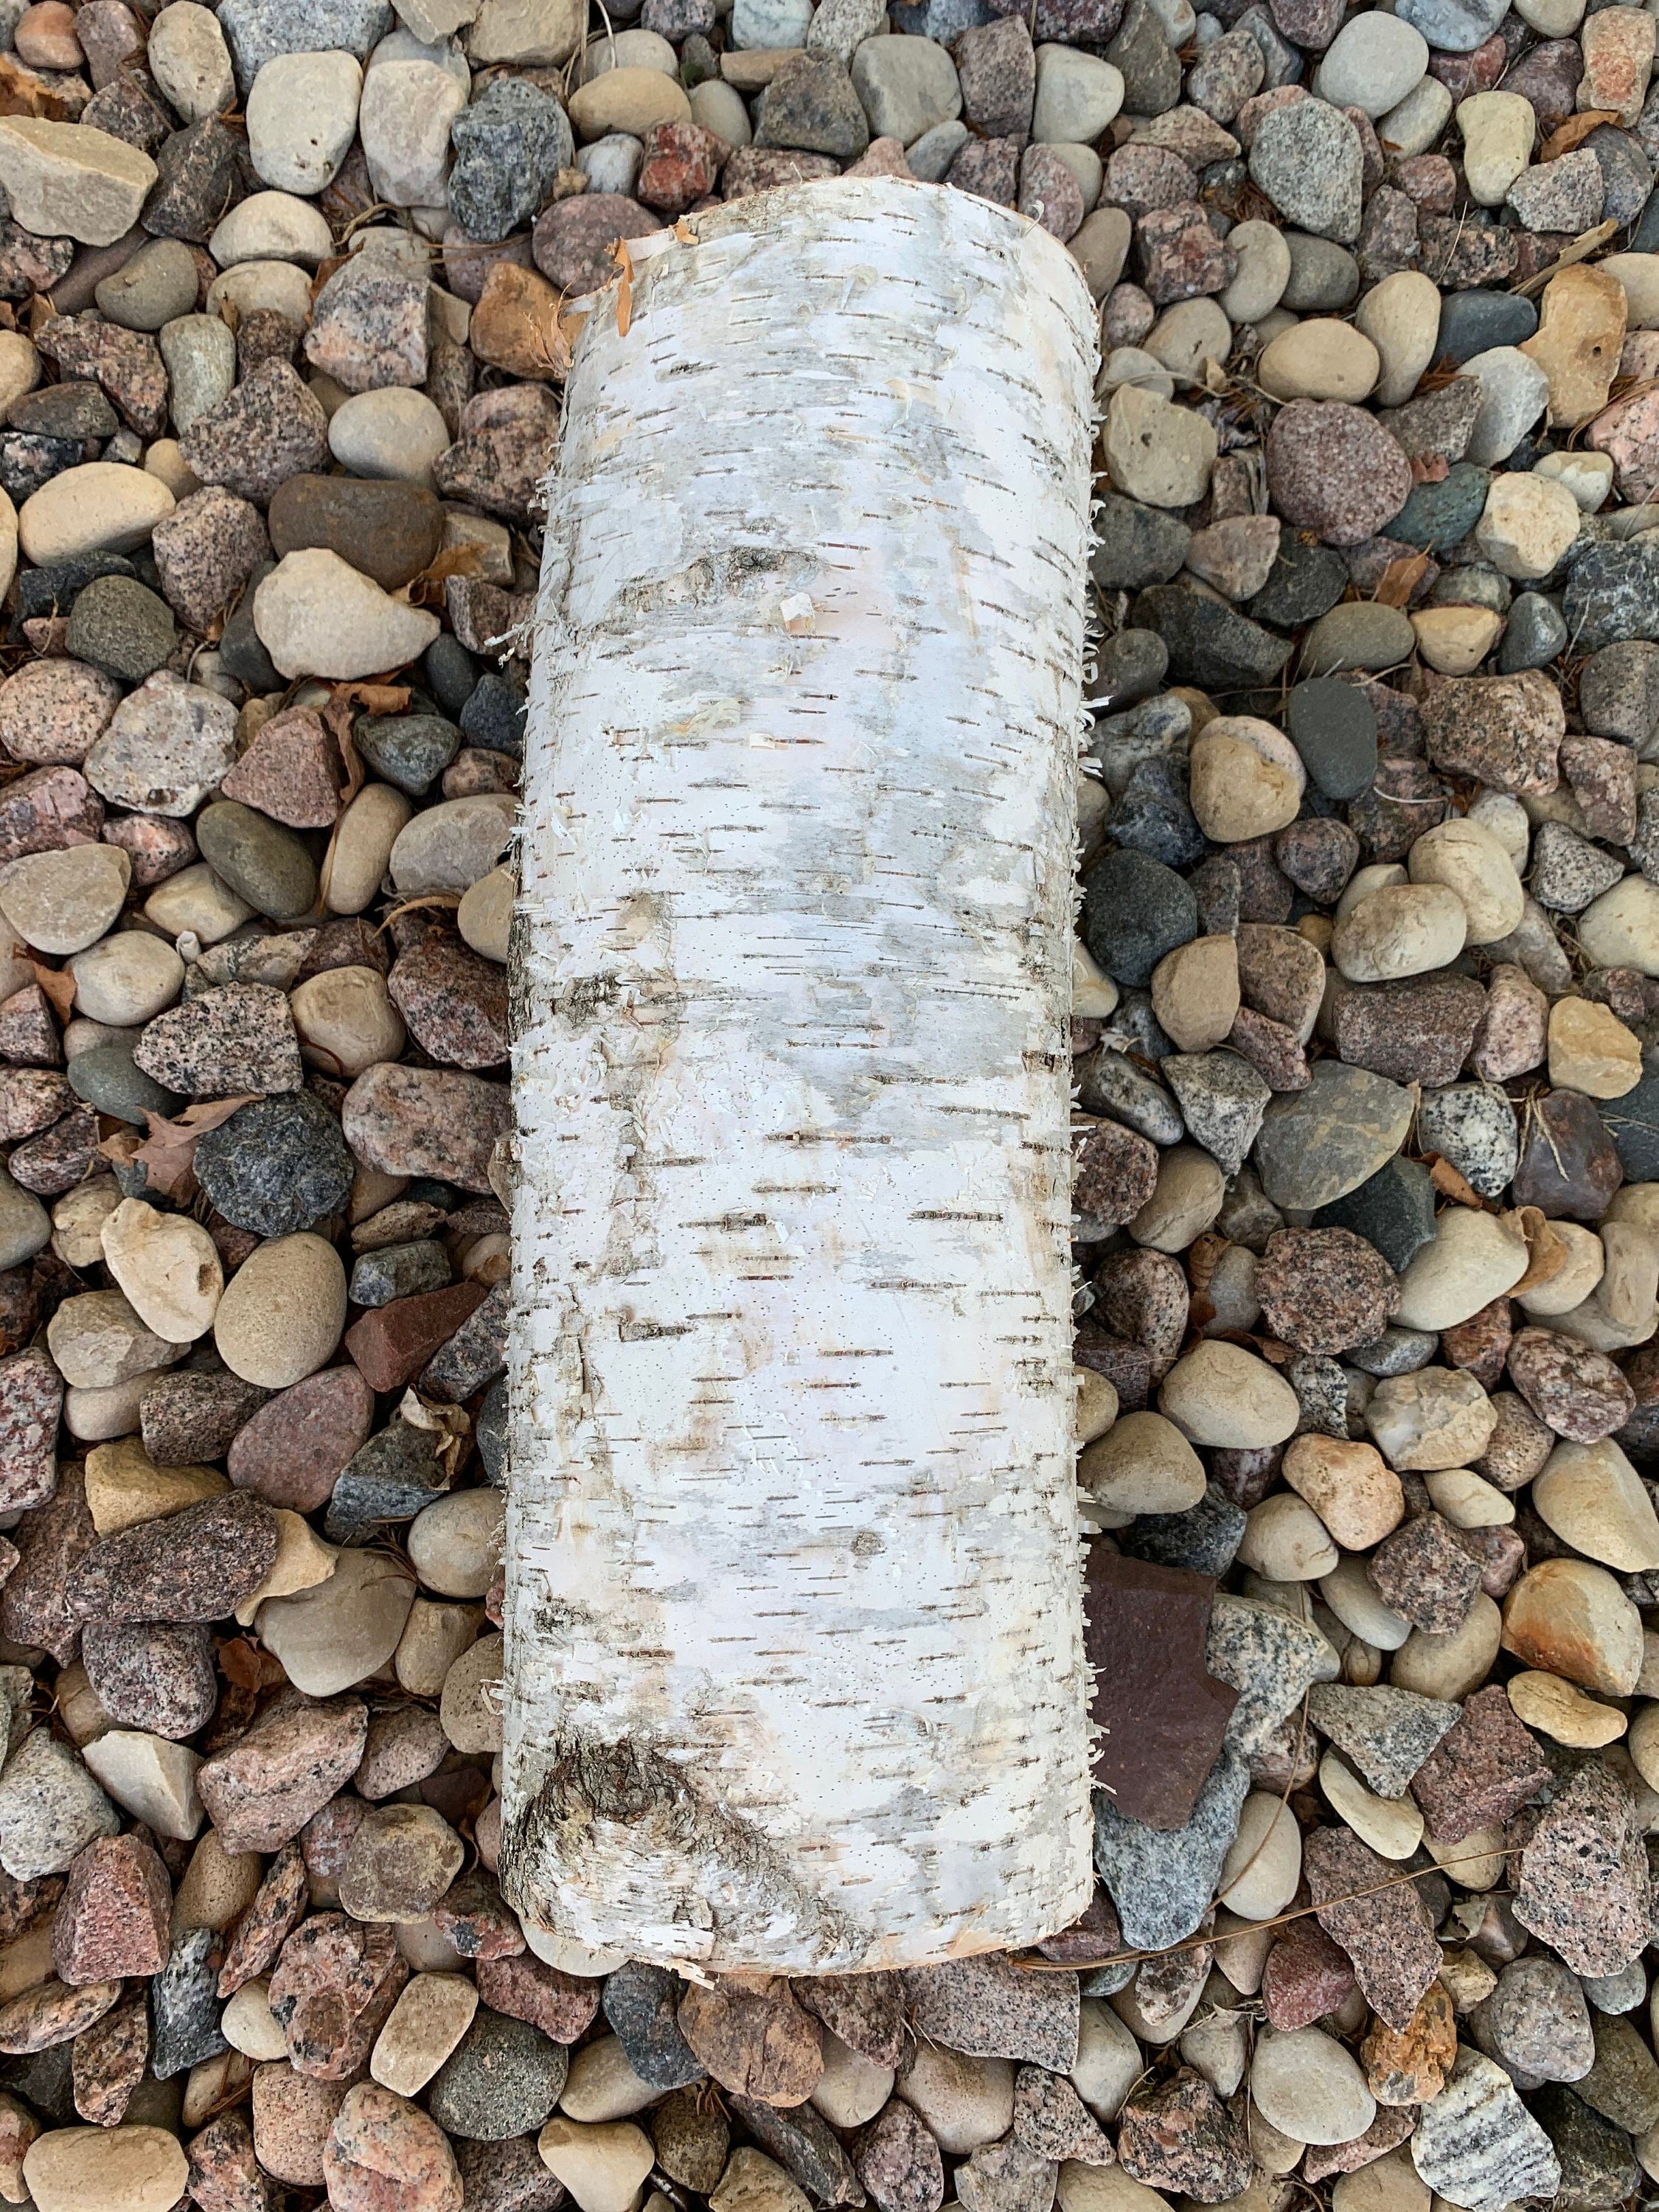 One White Birch Log approximately 16 inches in length, 5 plus inches in diameter